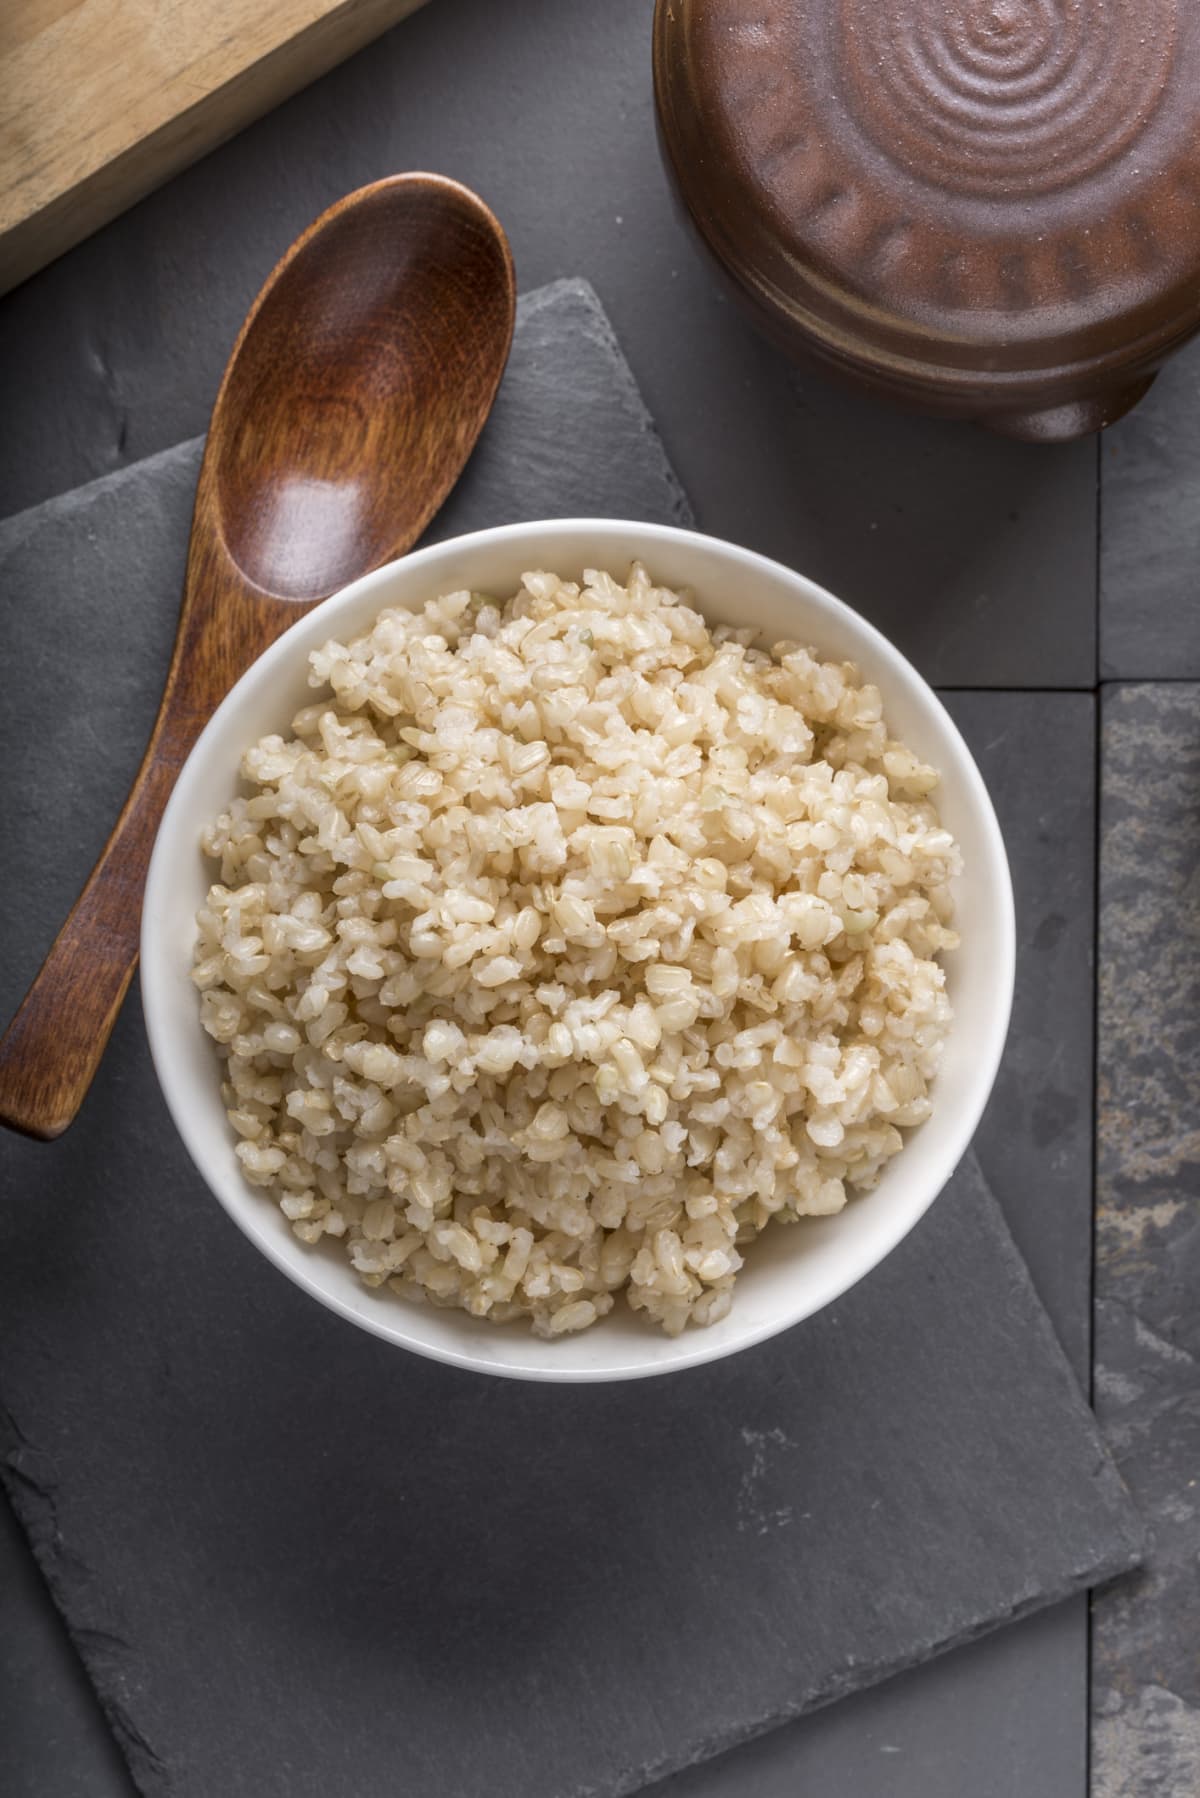 Cooked brown rice in a white bowl next to a wooden spoon on black surface